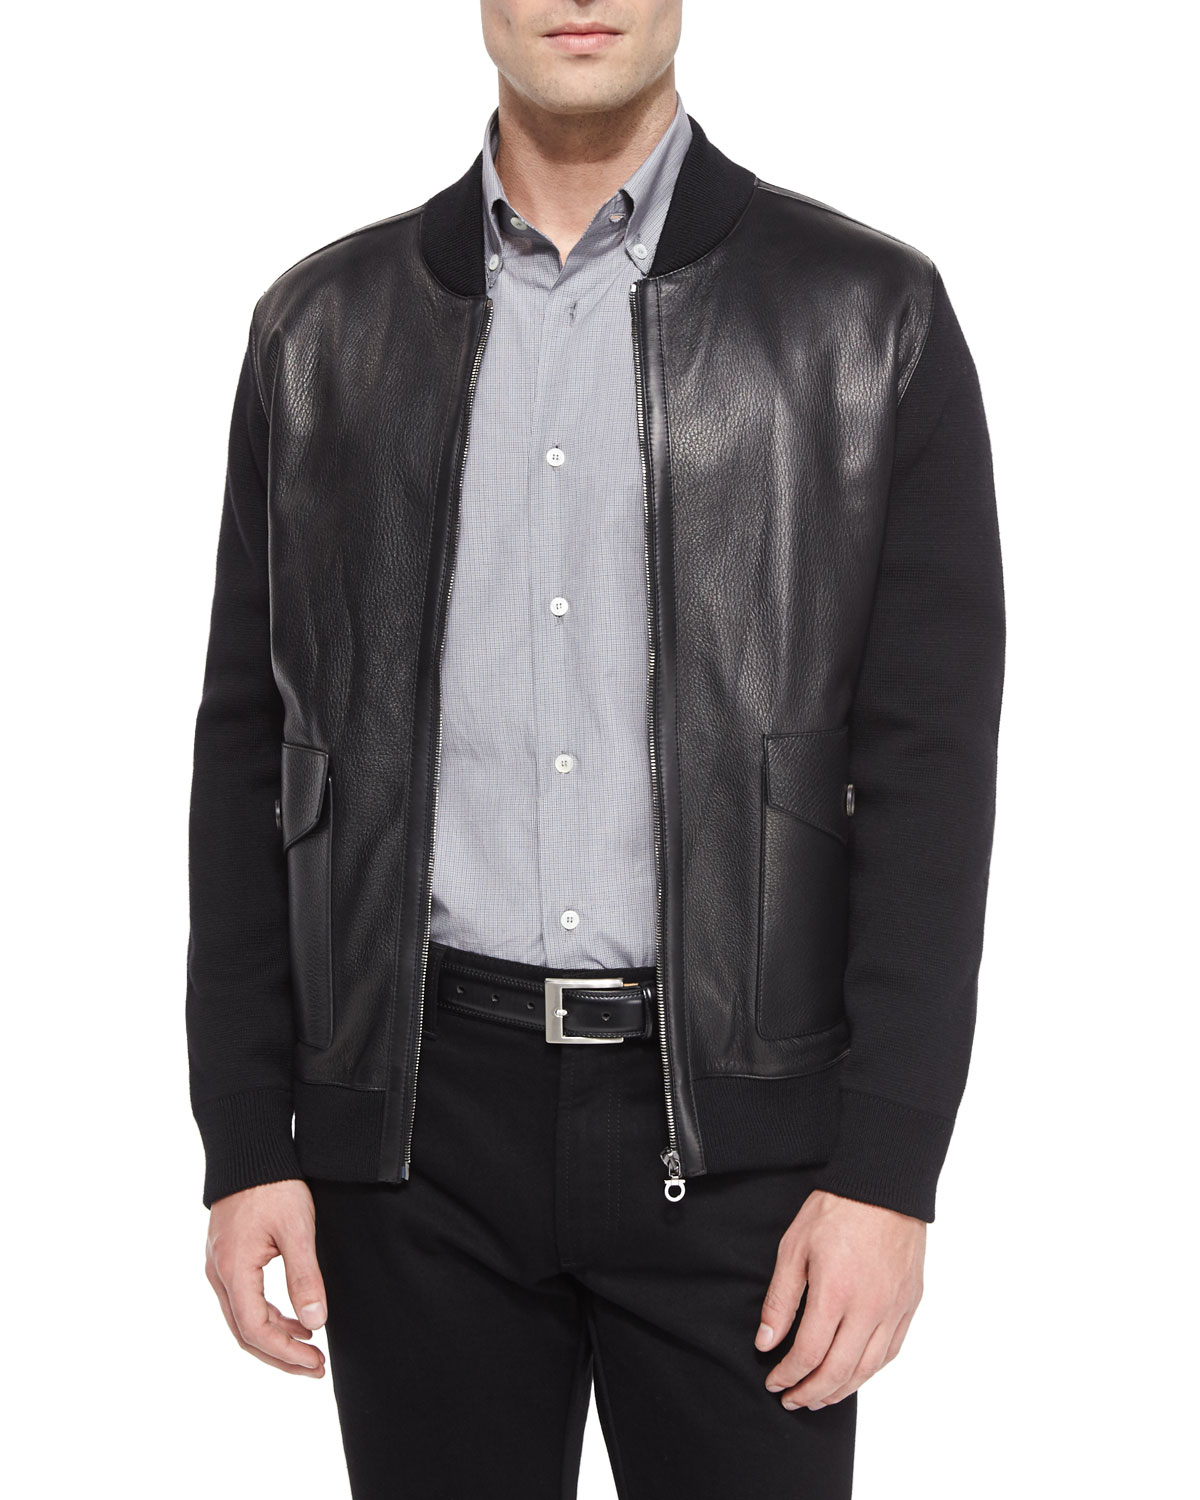 Lyst - Ferragamo Leather Jacket With Wool Sleeves in Black for Men